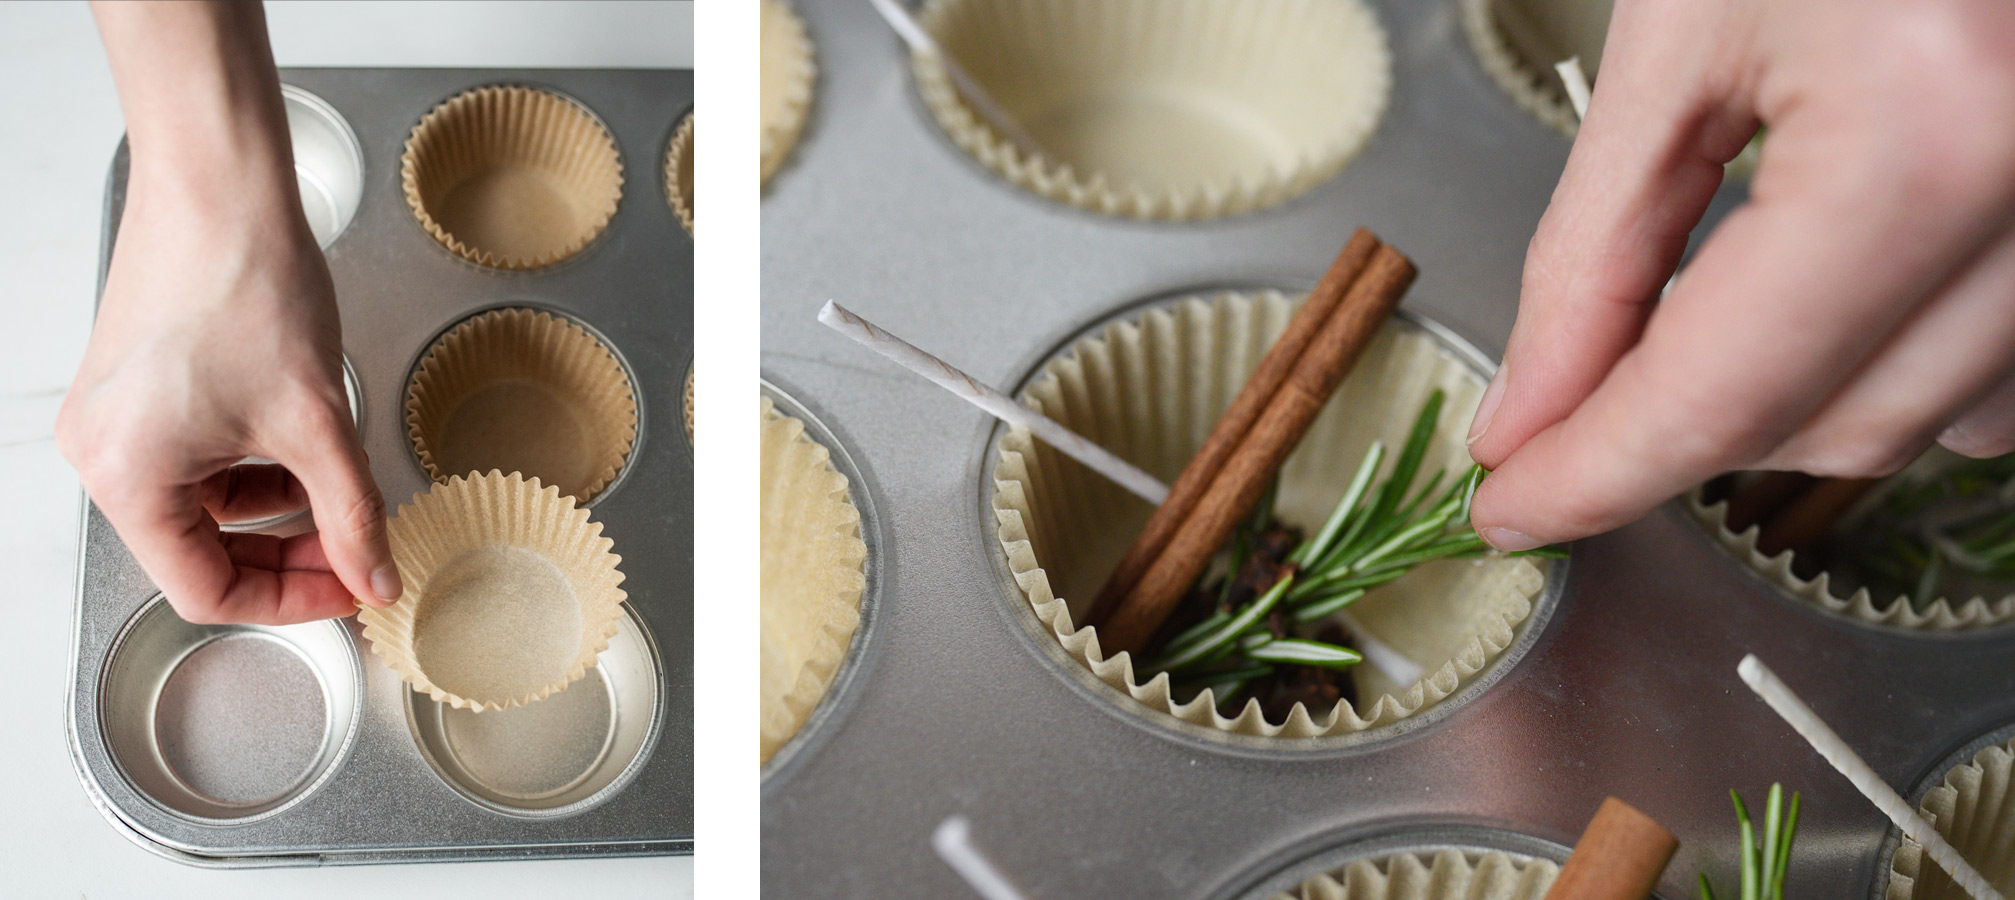 Placing muffin wrappers into muffin tin.